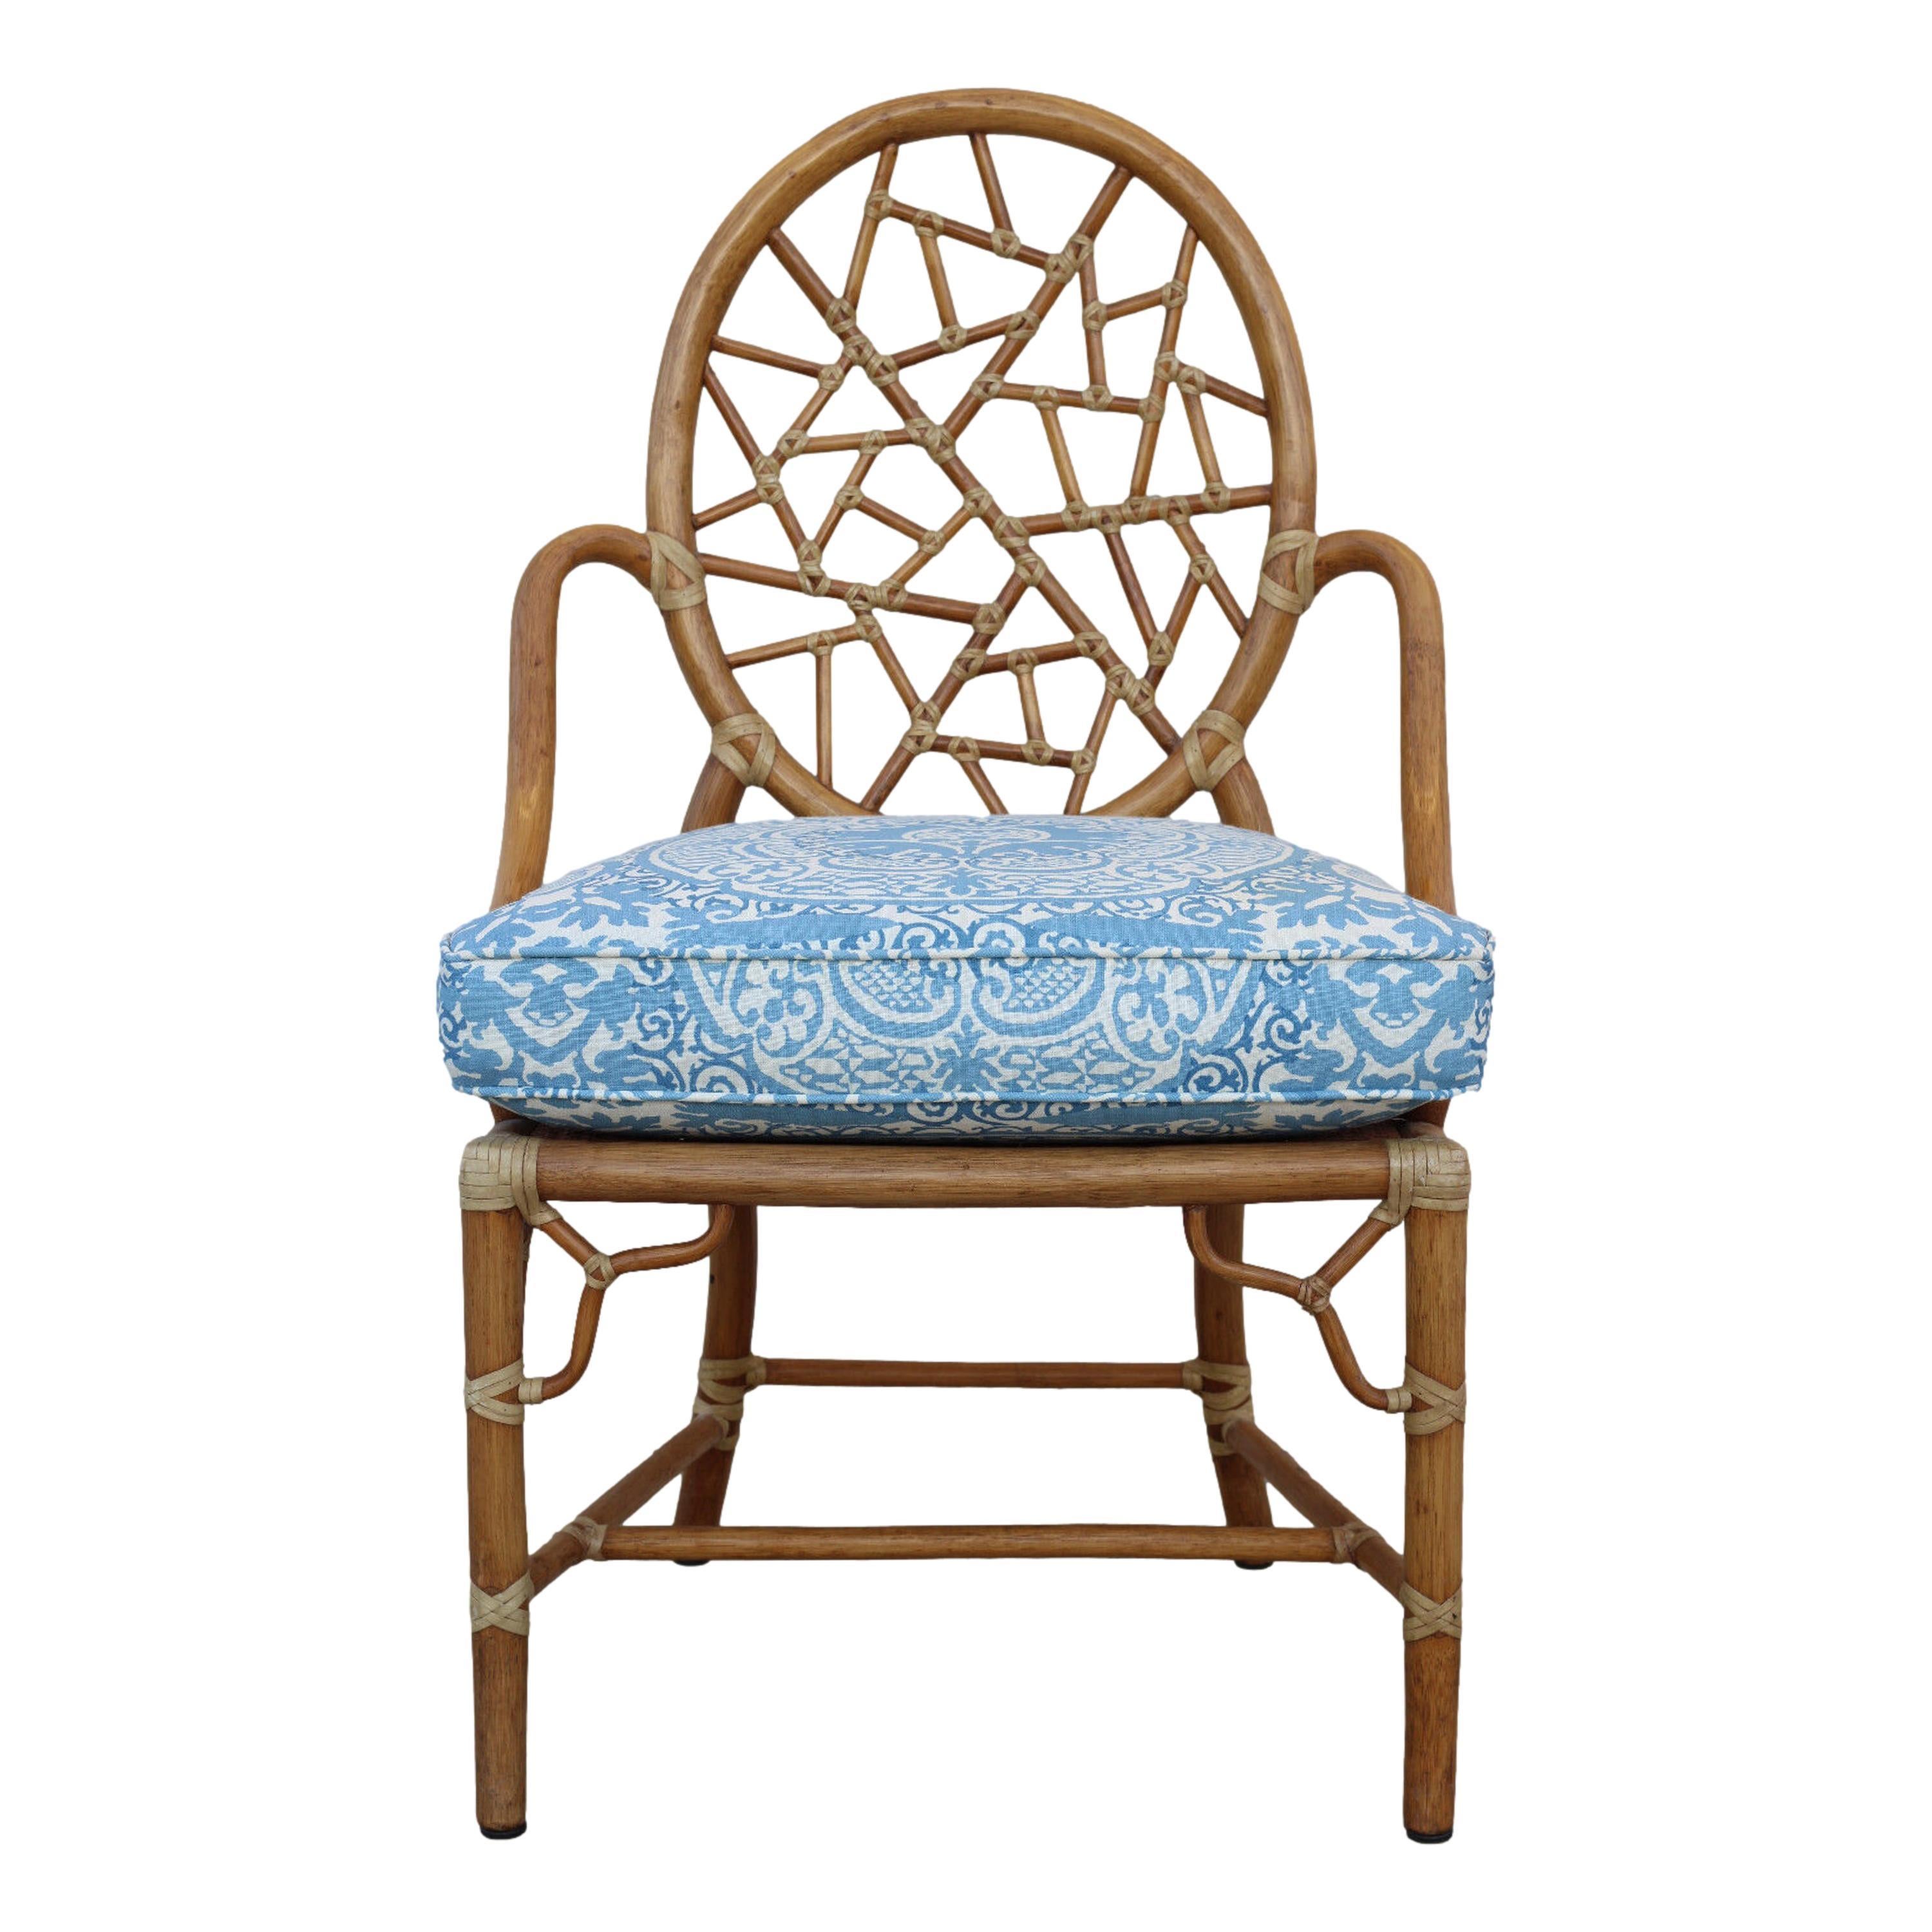 Gorgeous set of six iconic rattan Cracked Ice Chairs designed by breakthrough innovator Elinor McGuire. The design is famous for its rattan oval back that frames smaller rattan pieces bound by rawhide, creating the impression of cracked ice or